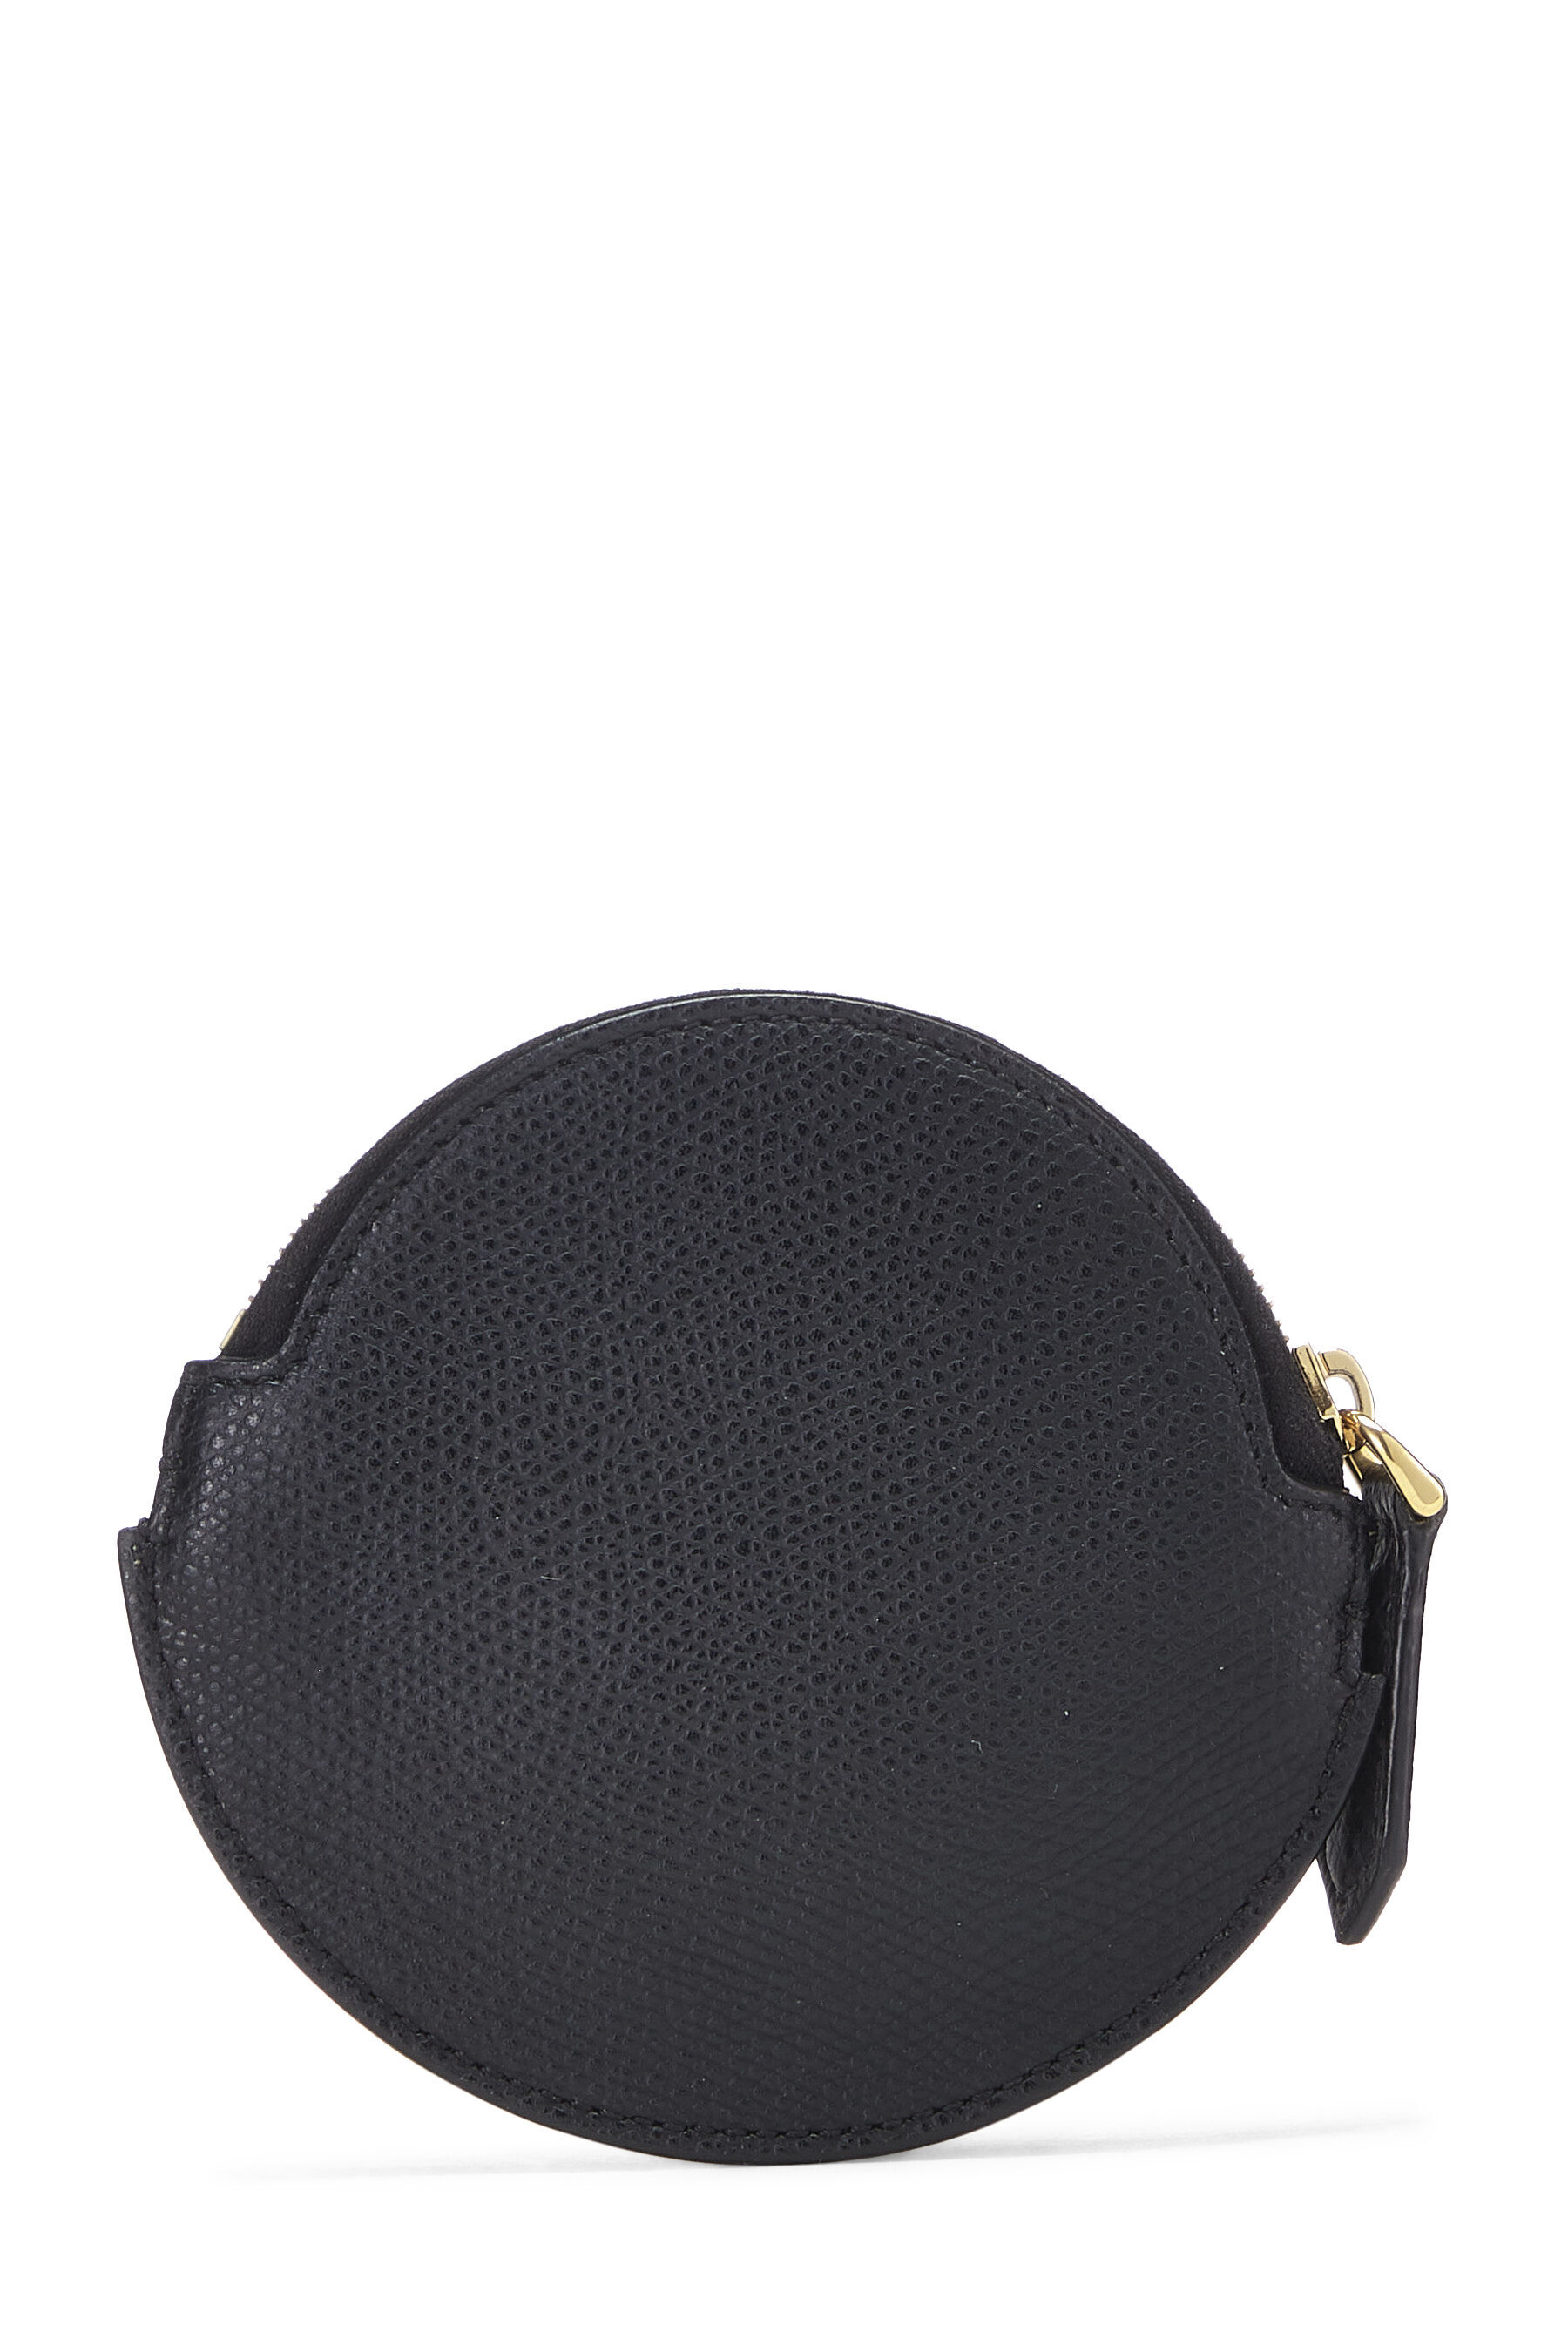 Buy KLEIO Peach Quilted Round Coin Pouch | Shoppers Stop